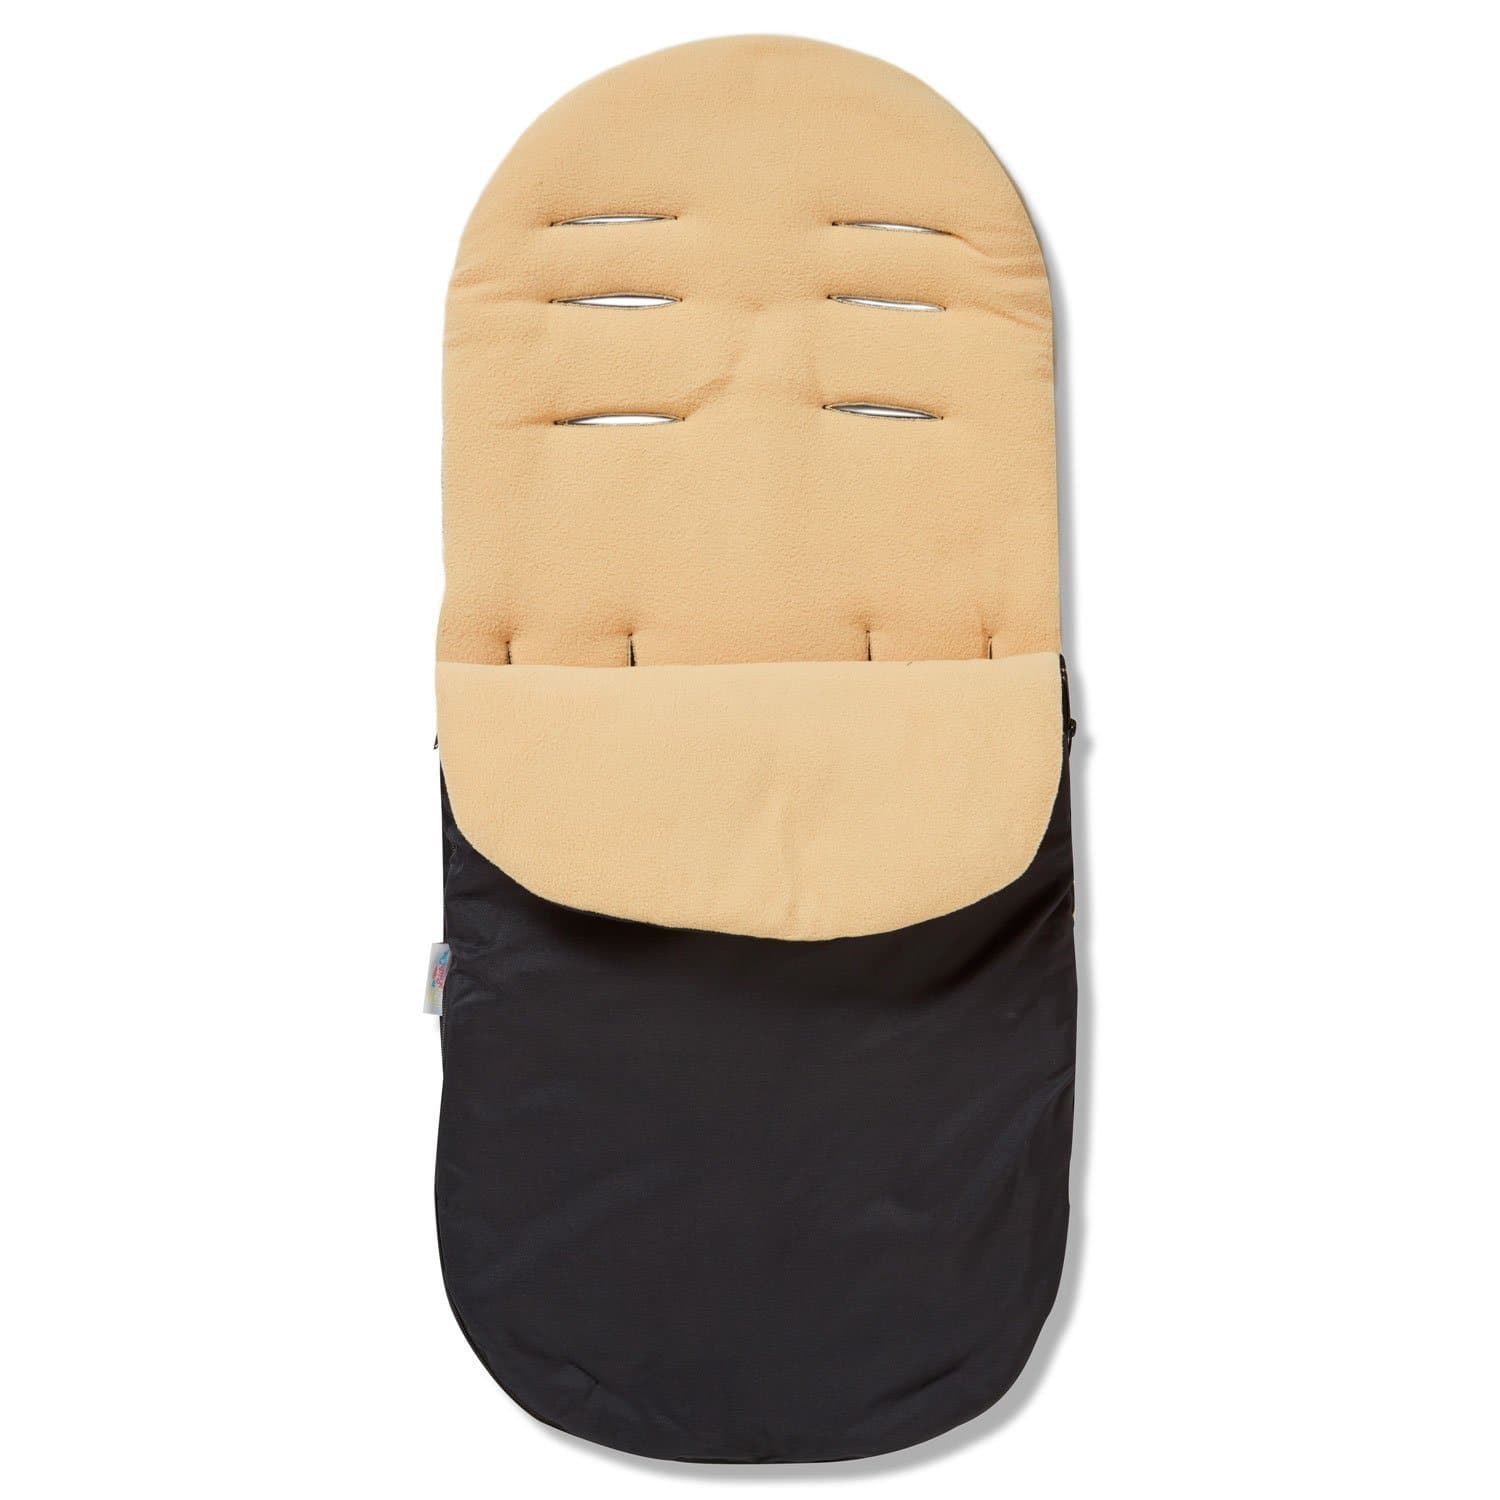 Footmuff / Cosy Toes Compatible with Concord - For Your Little One